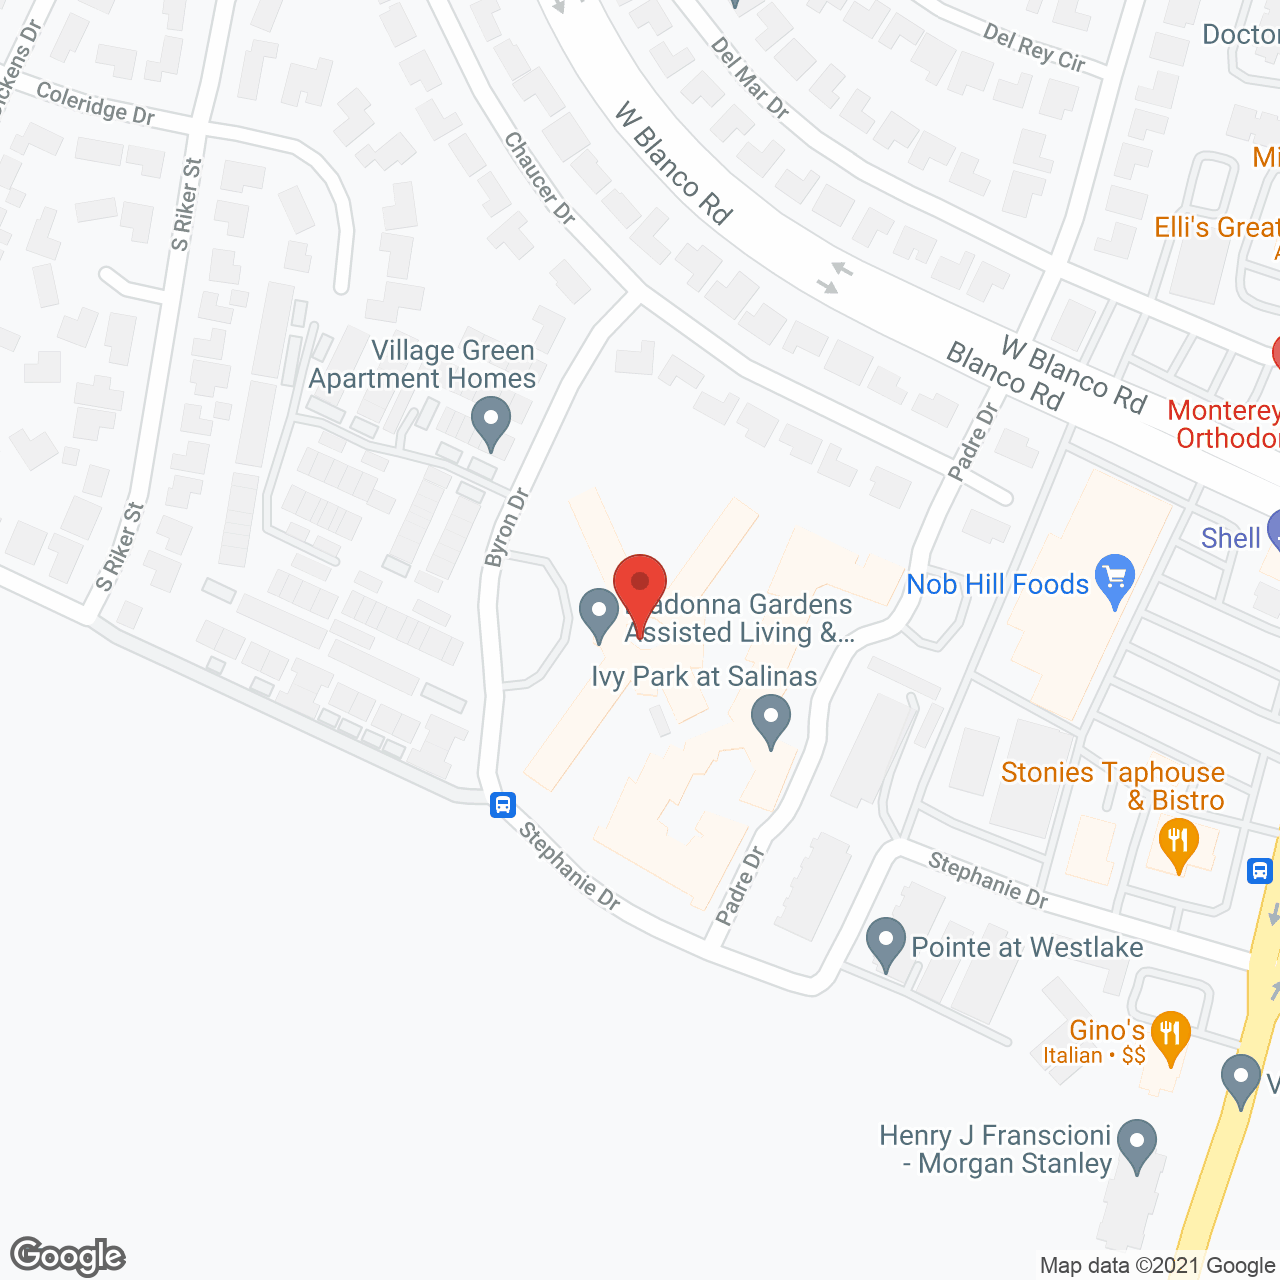 Madonna Gardens Assisted Living & Memory Care in google map